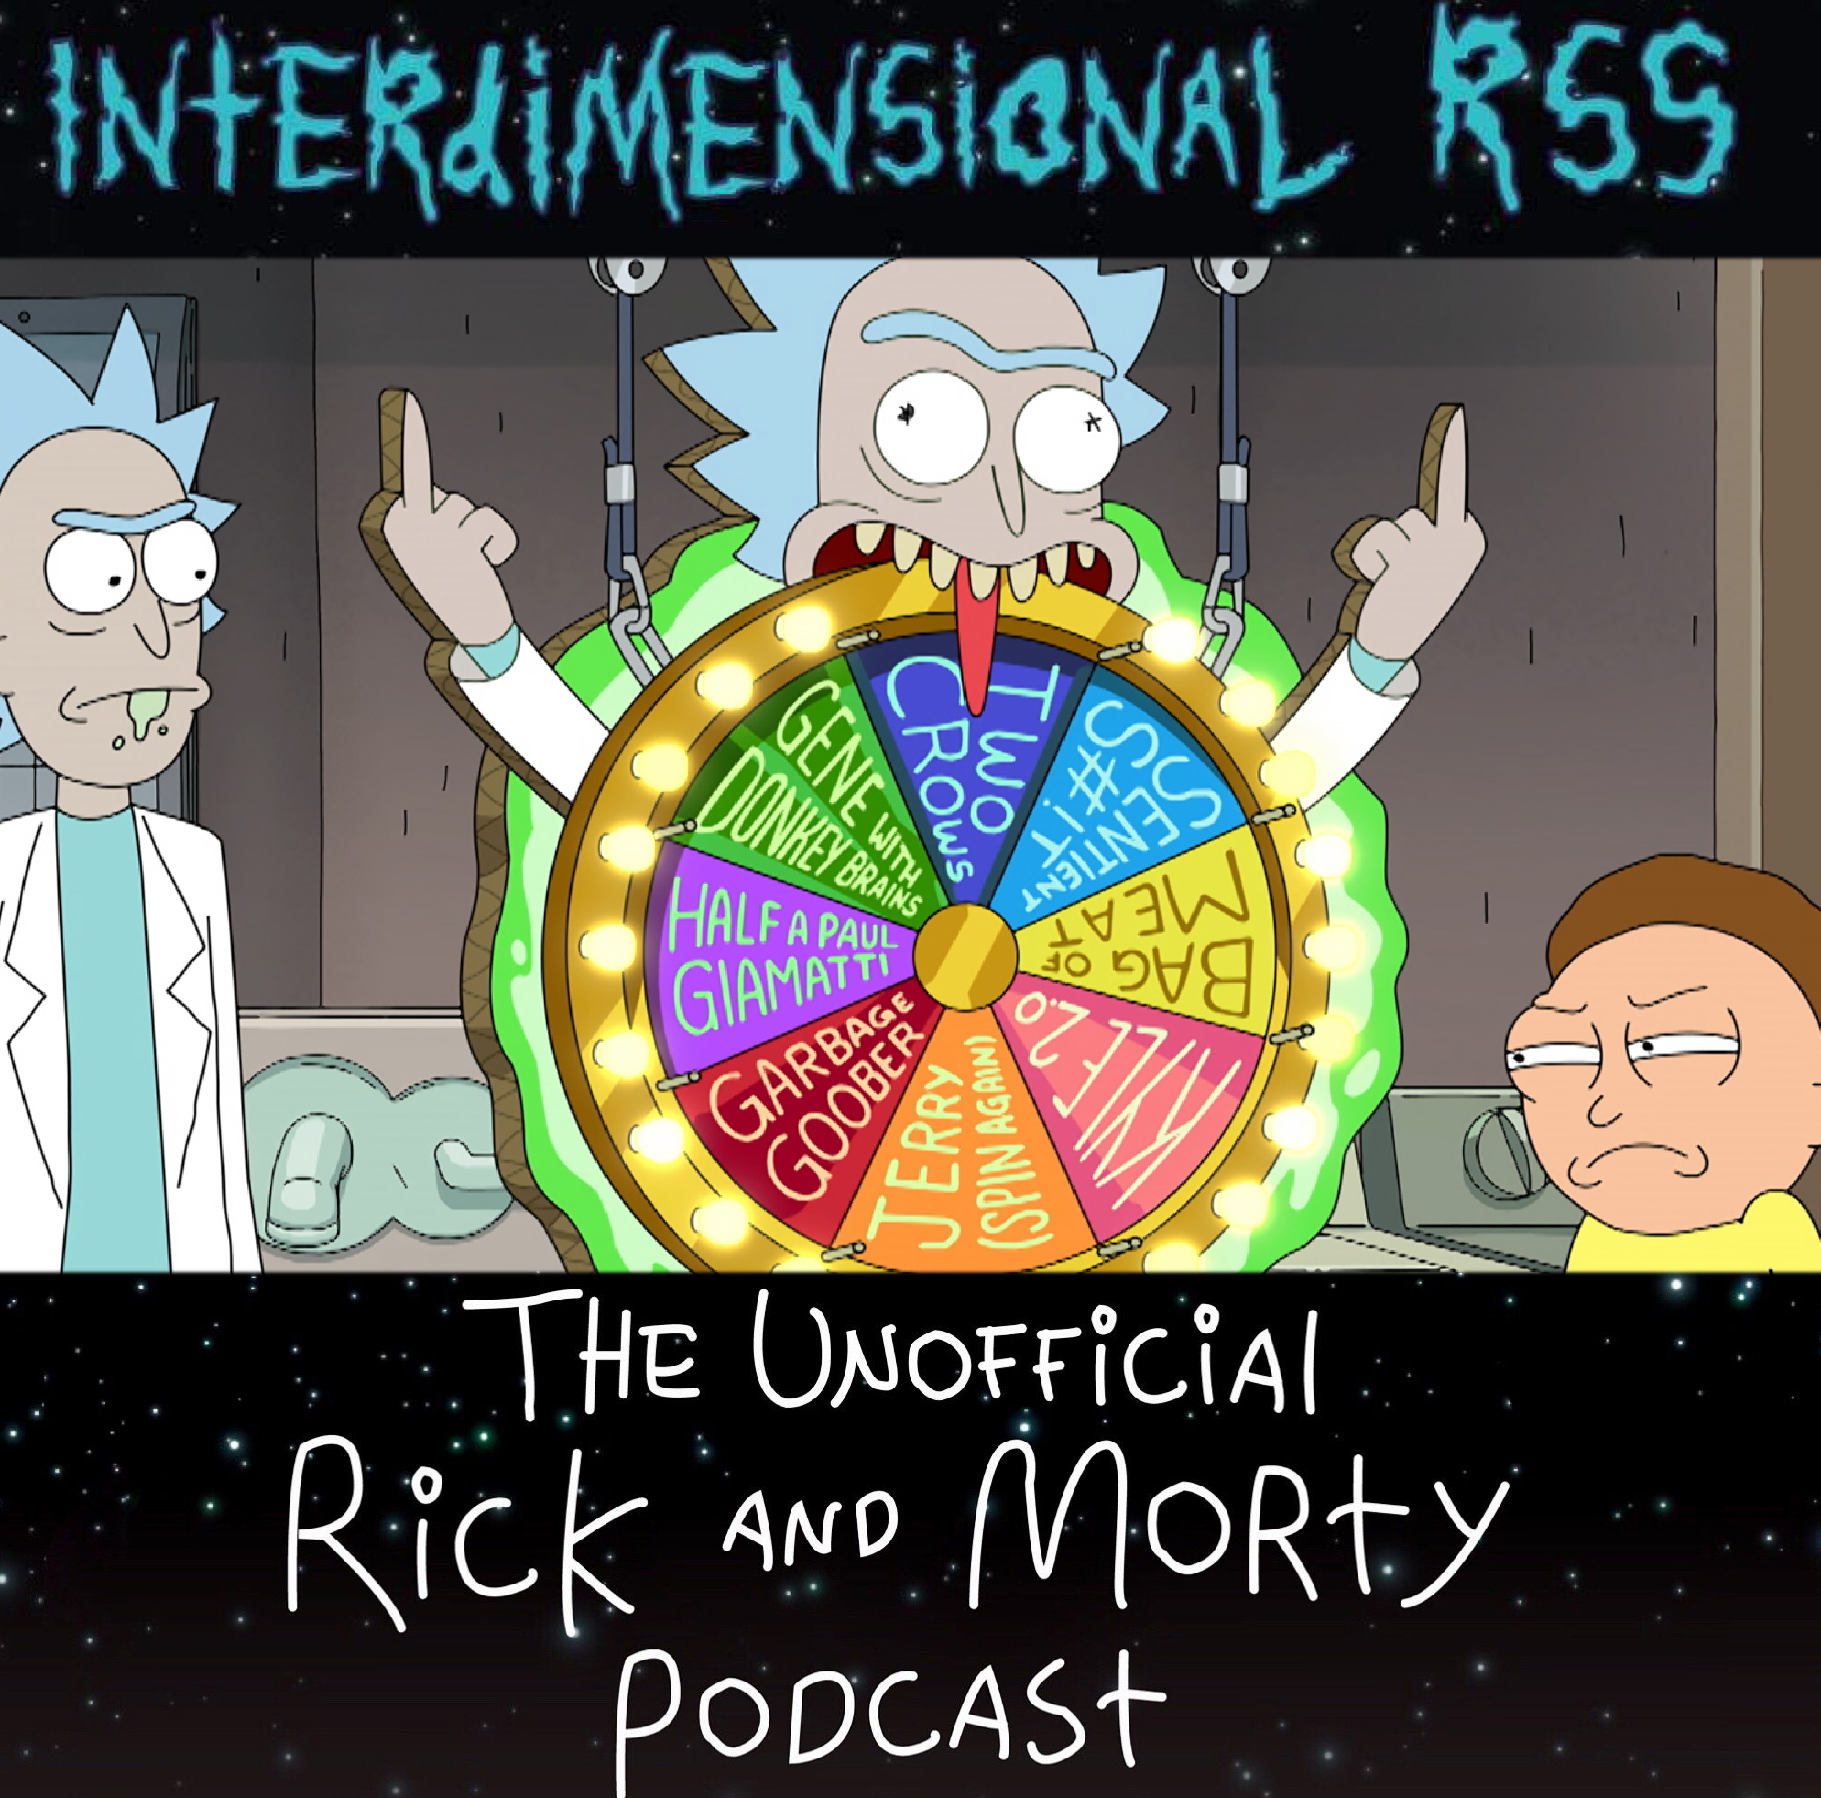 And then this happened : r/rickandmorty